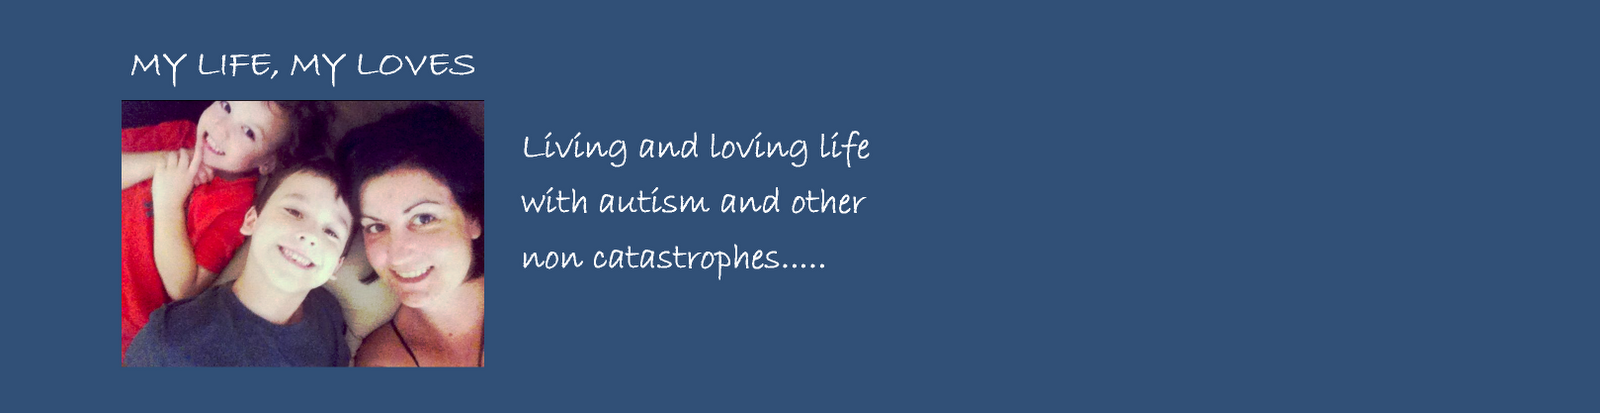 MY LIFE, MY LOVES - Life & love with autism